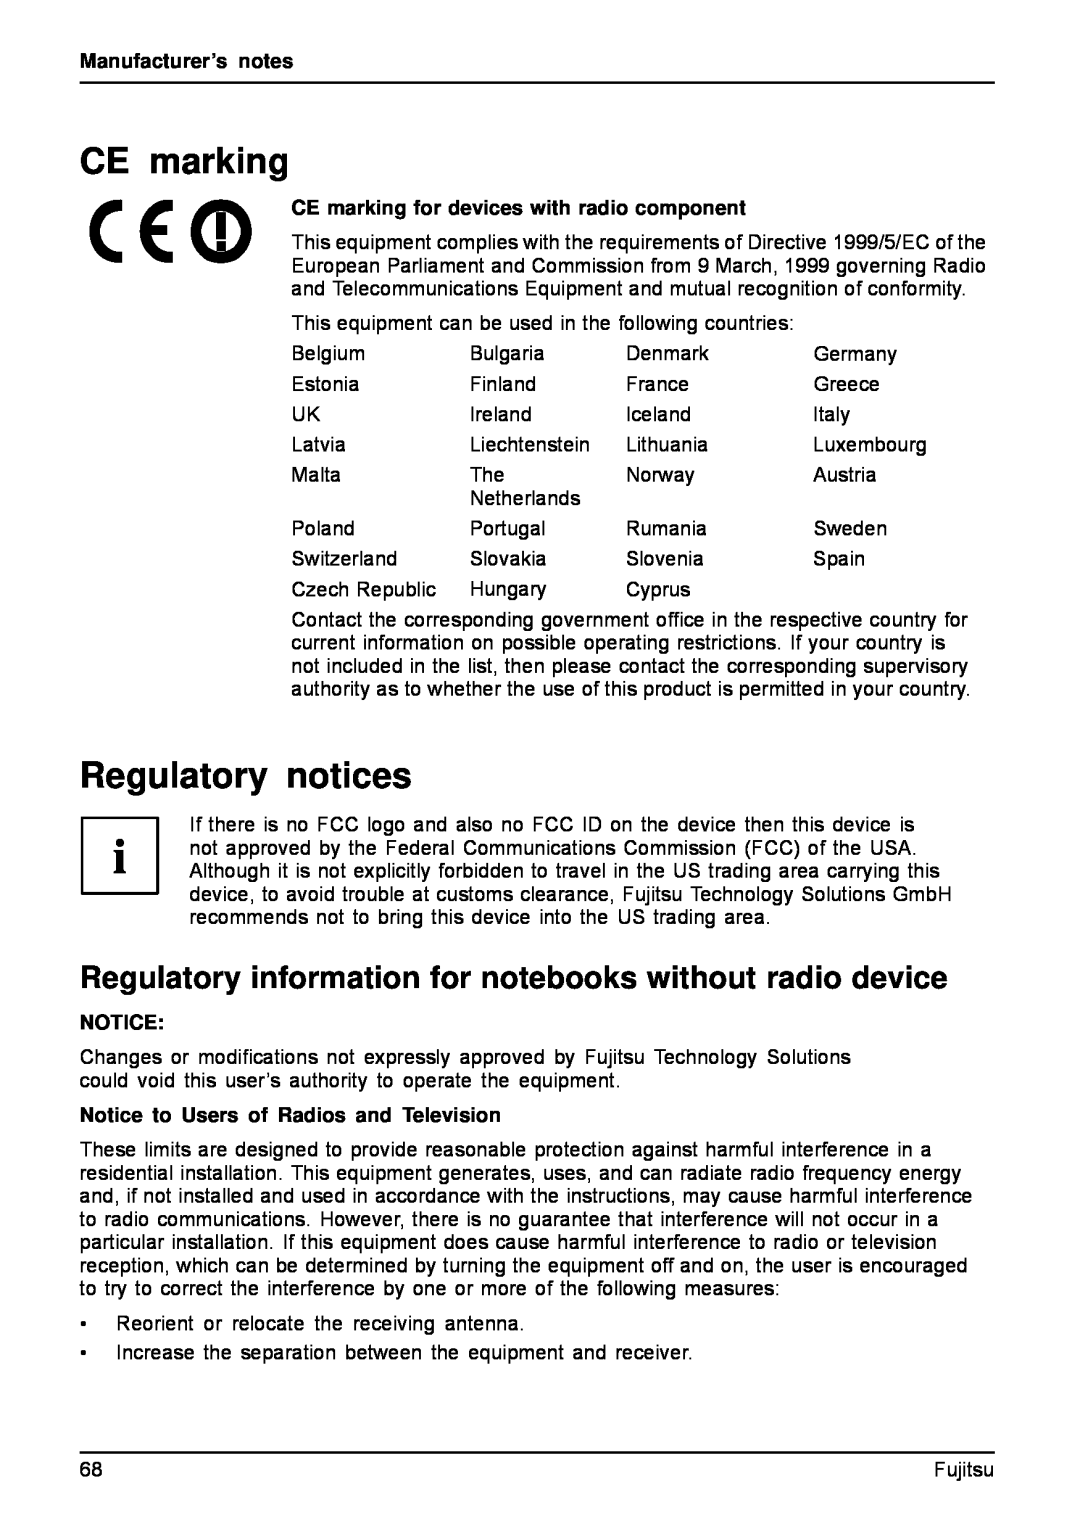 Fujitsu AH512, A512 manual CE marking, Regulatory notices, Regulatory information for notebooks without radio device 